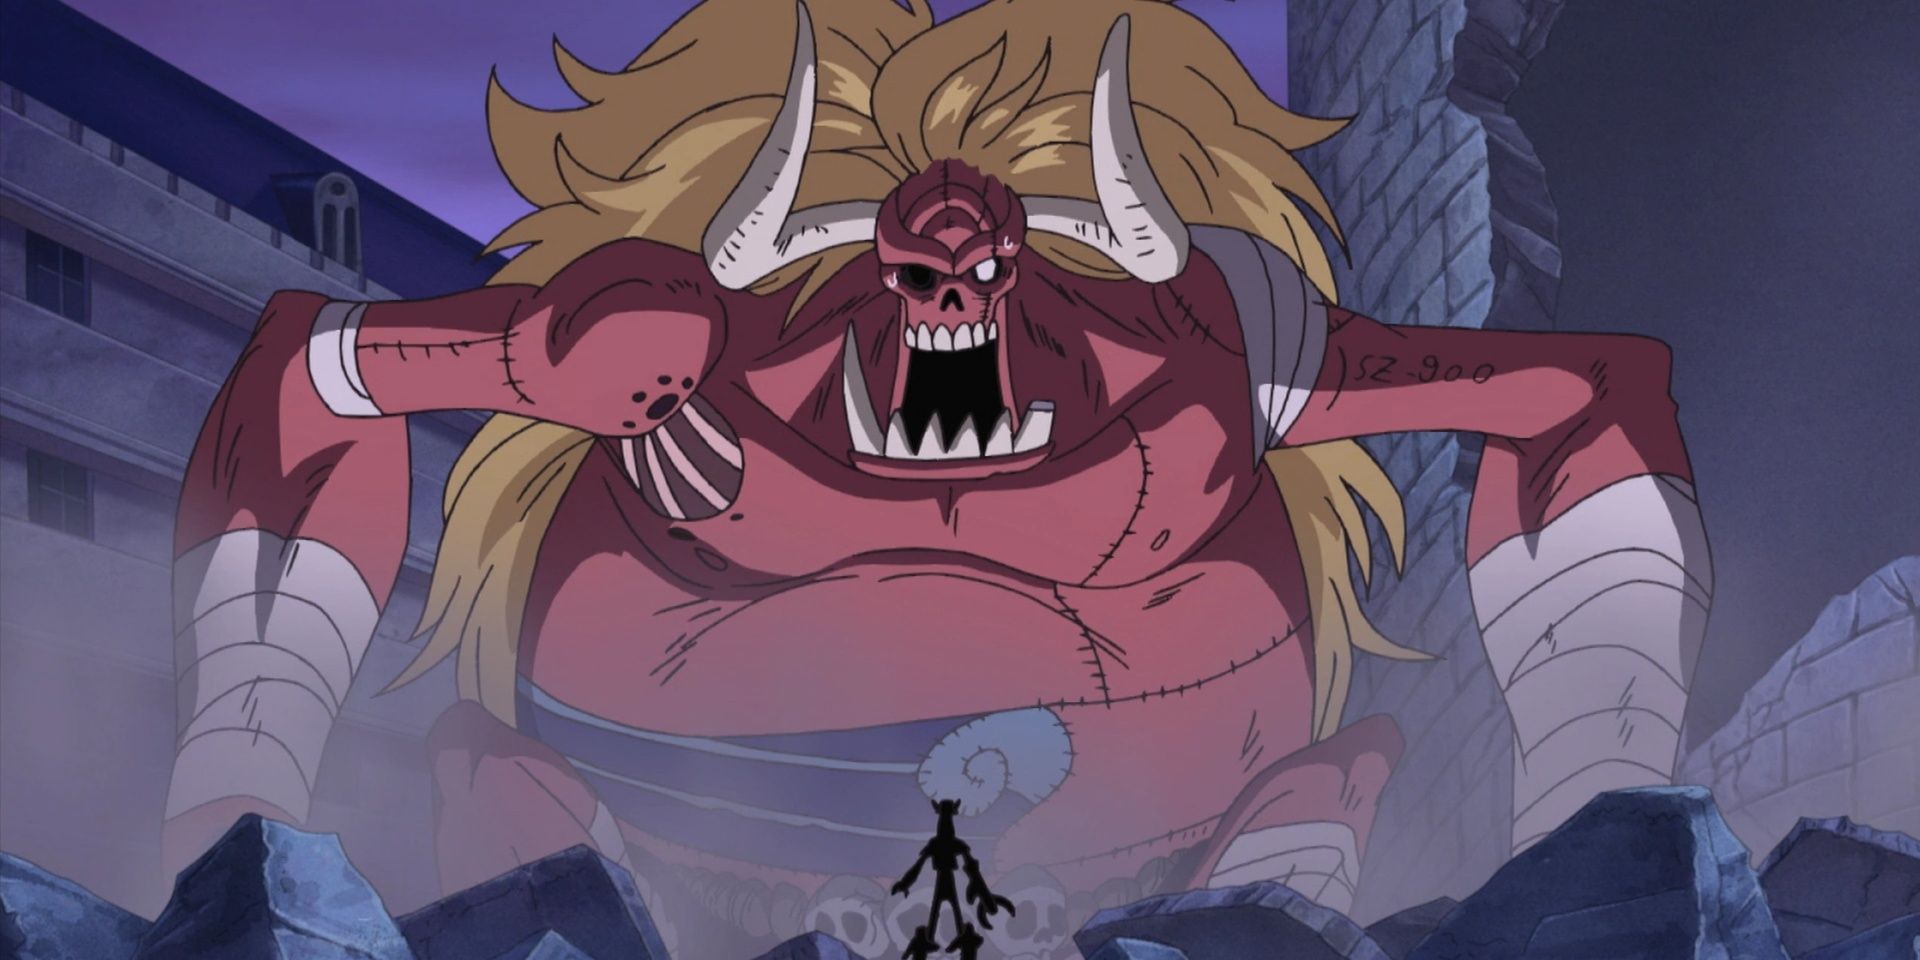 Usopp stands in front of Oars during their battle at Thriller Bark in One Piece.